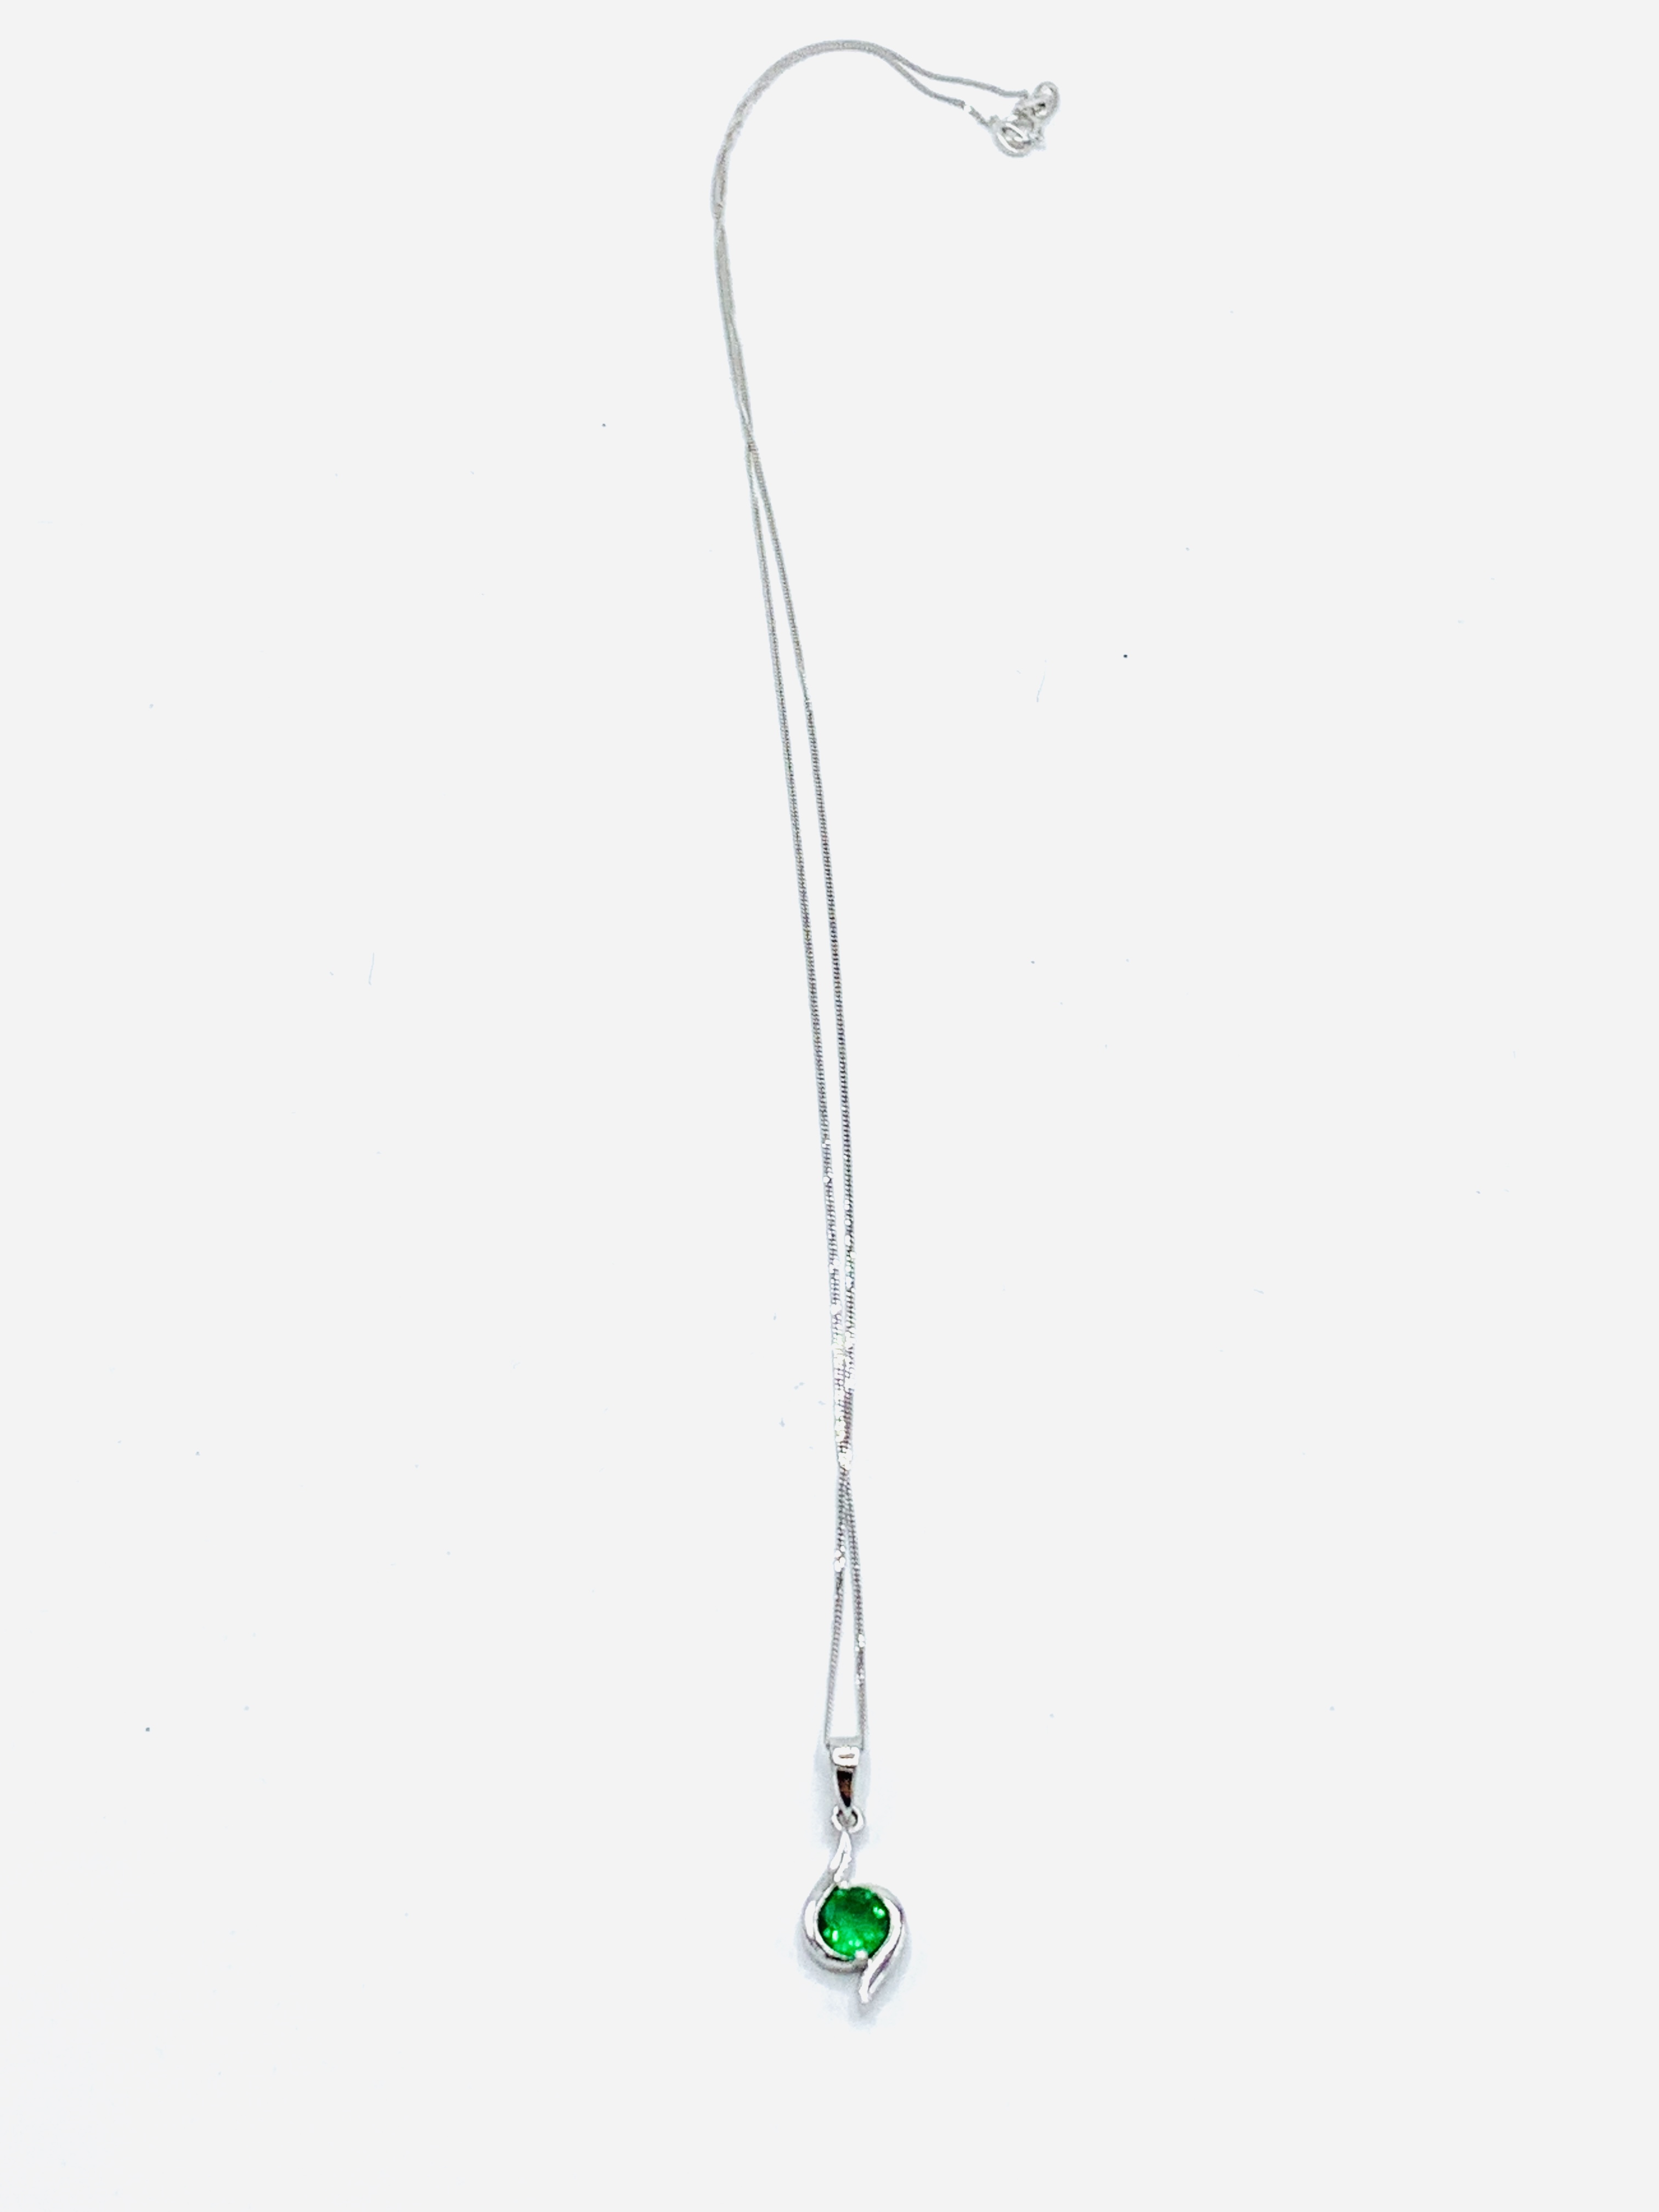 9ct white gold and green stone pendant on a 9ct white gold chain - Image 2 of 2